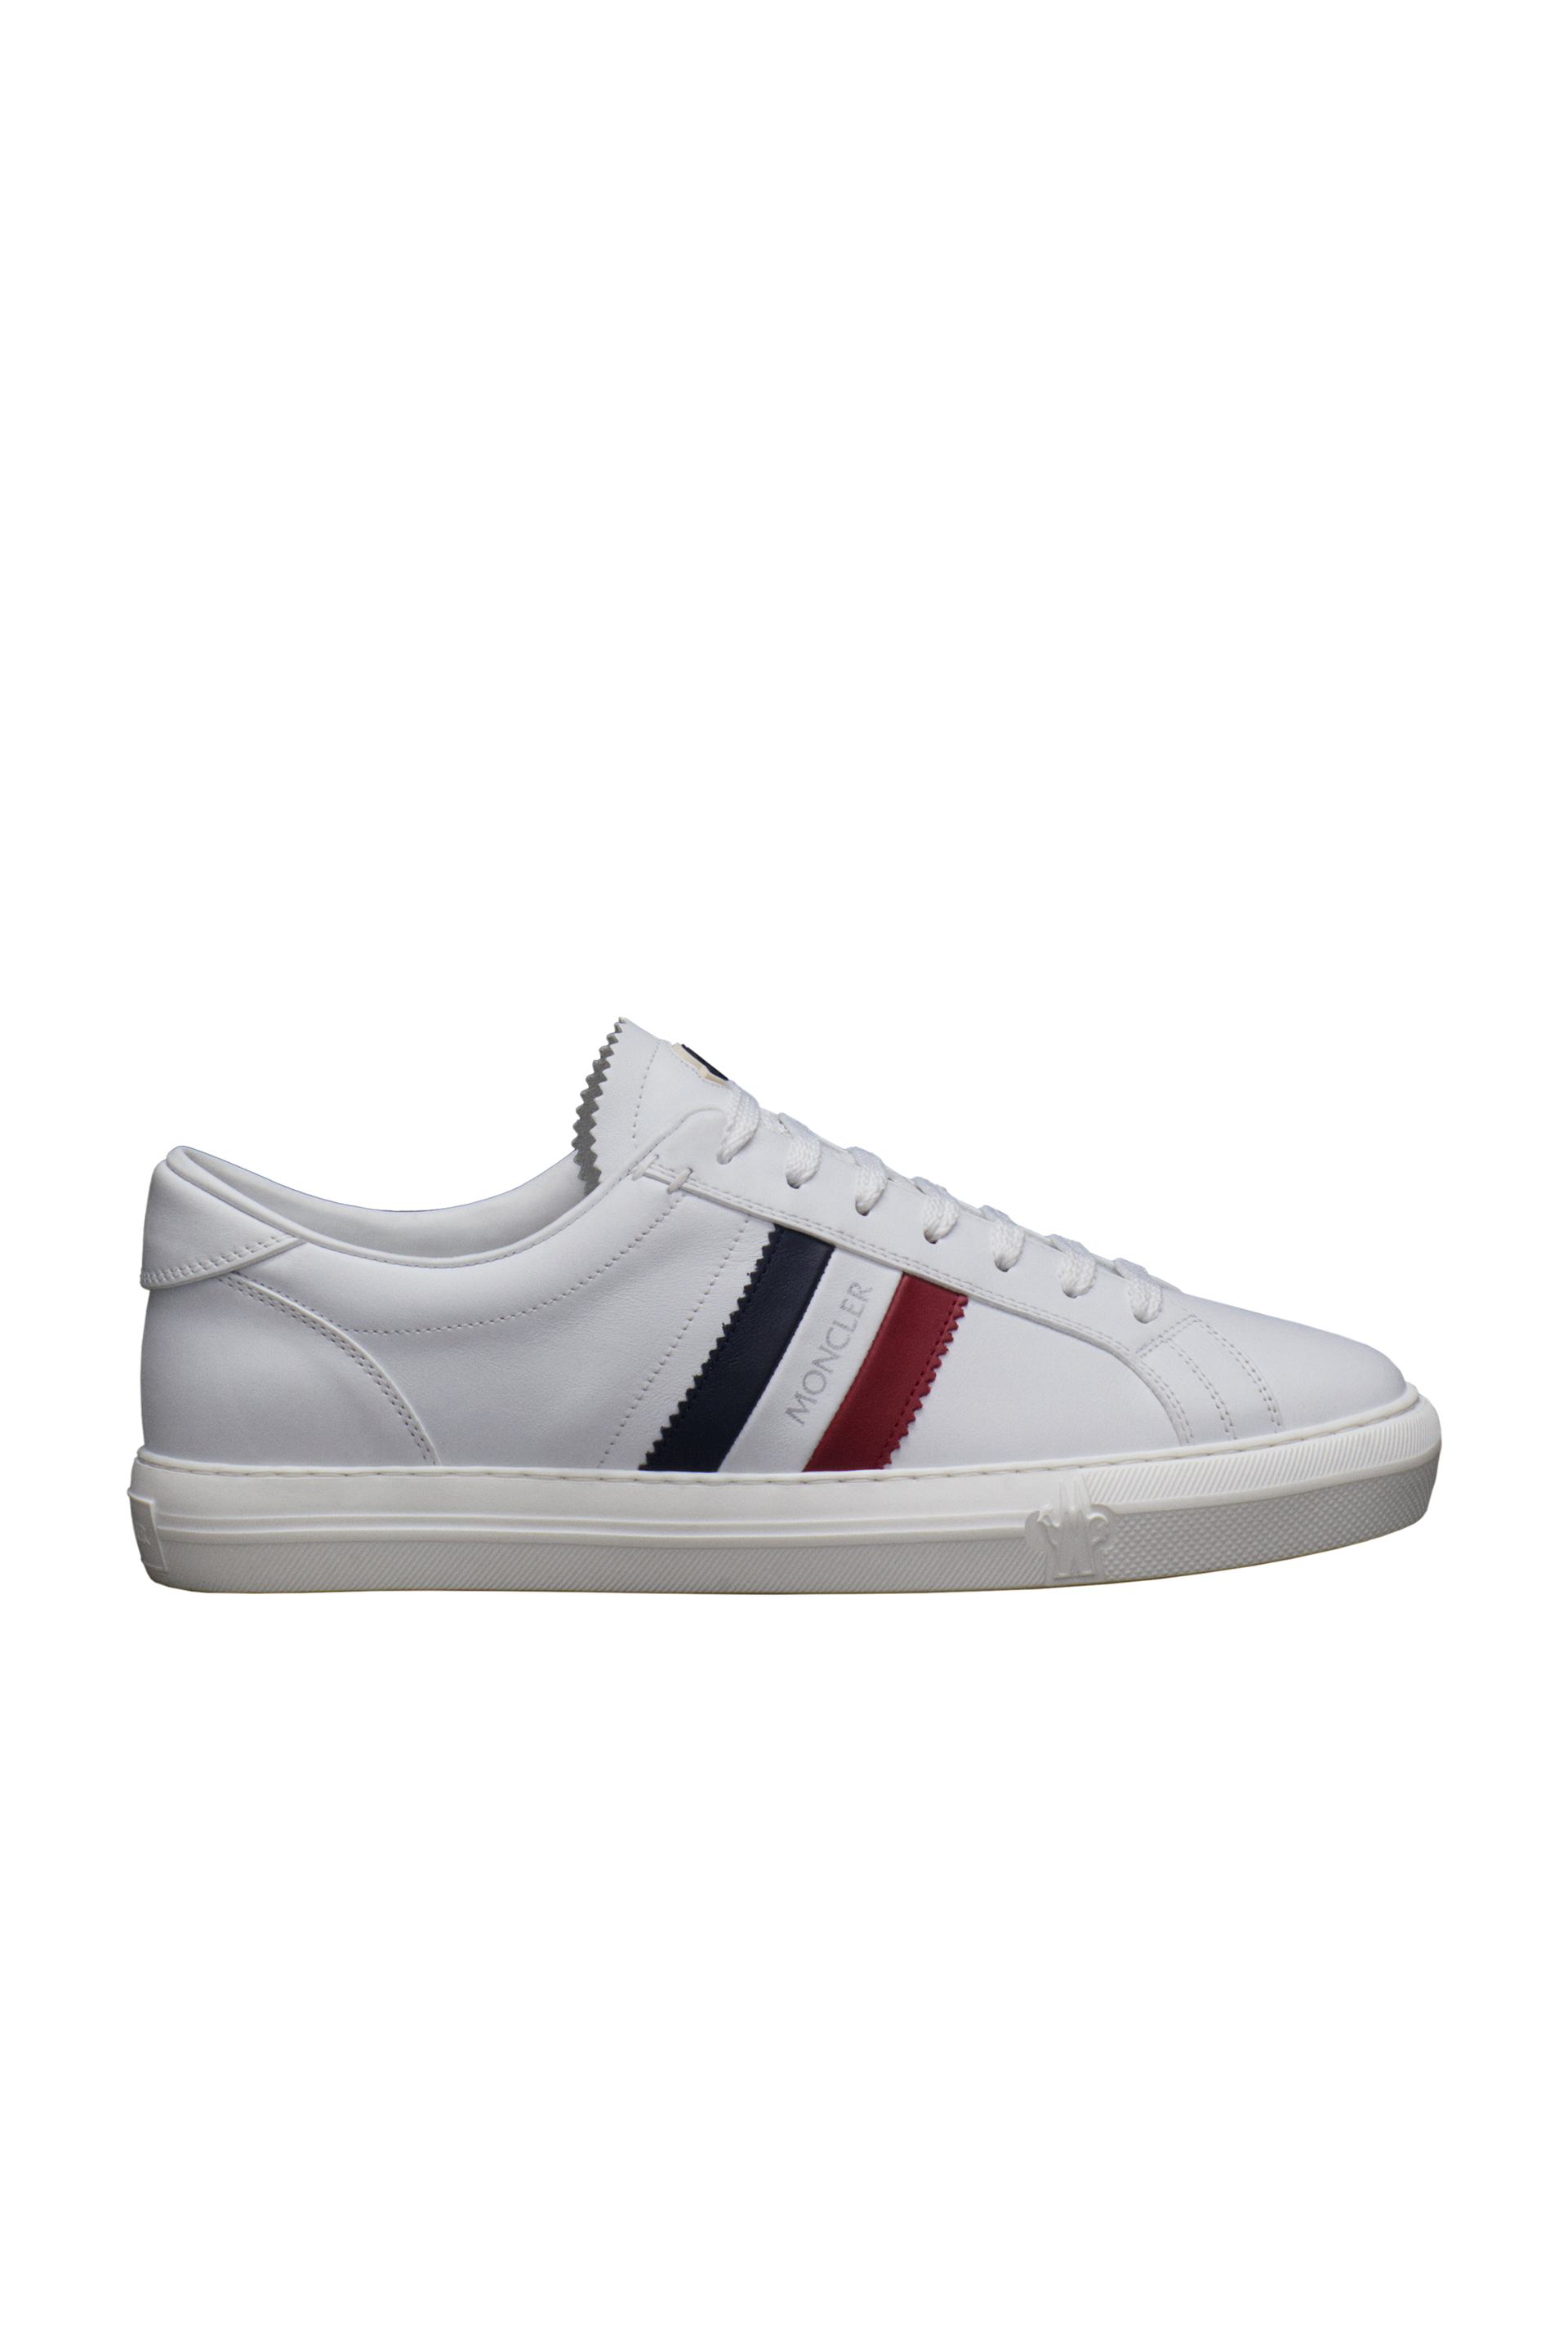 Moncler Collection New Monaco Trainers White Size 41